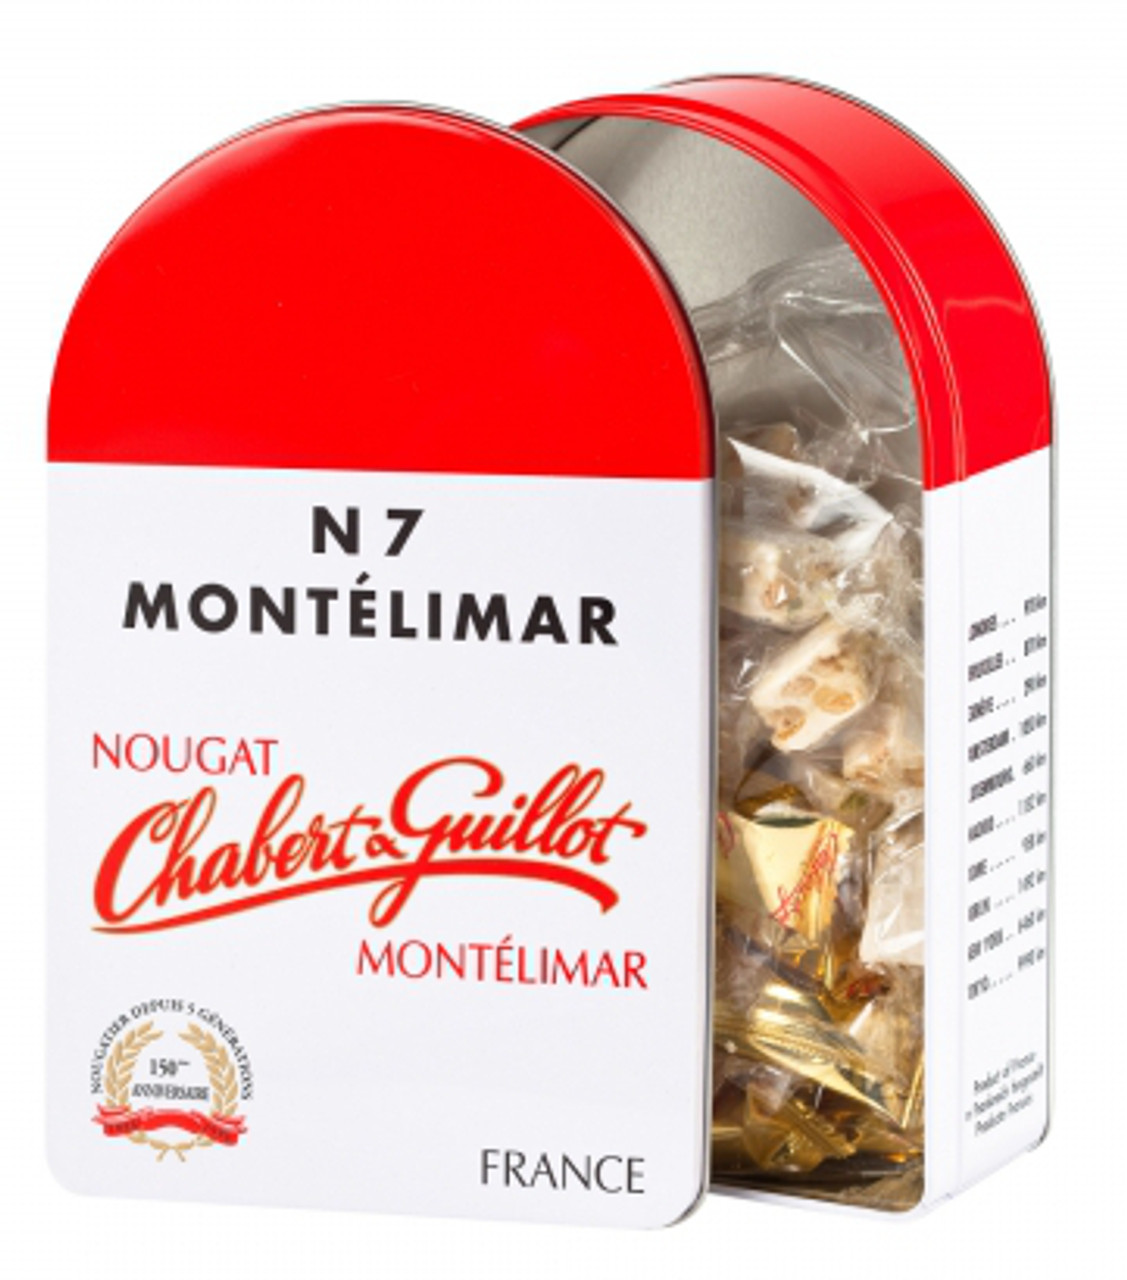 Chabert & Guillot Nougat Pieces in No 7 Tin